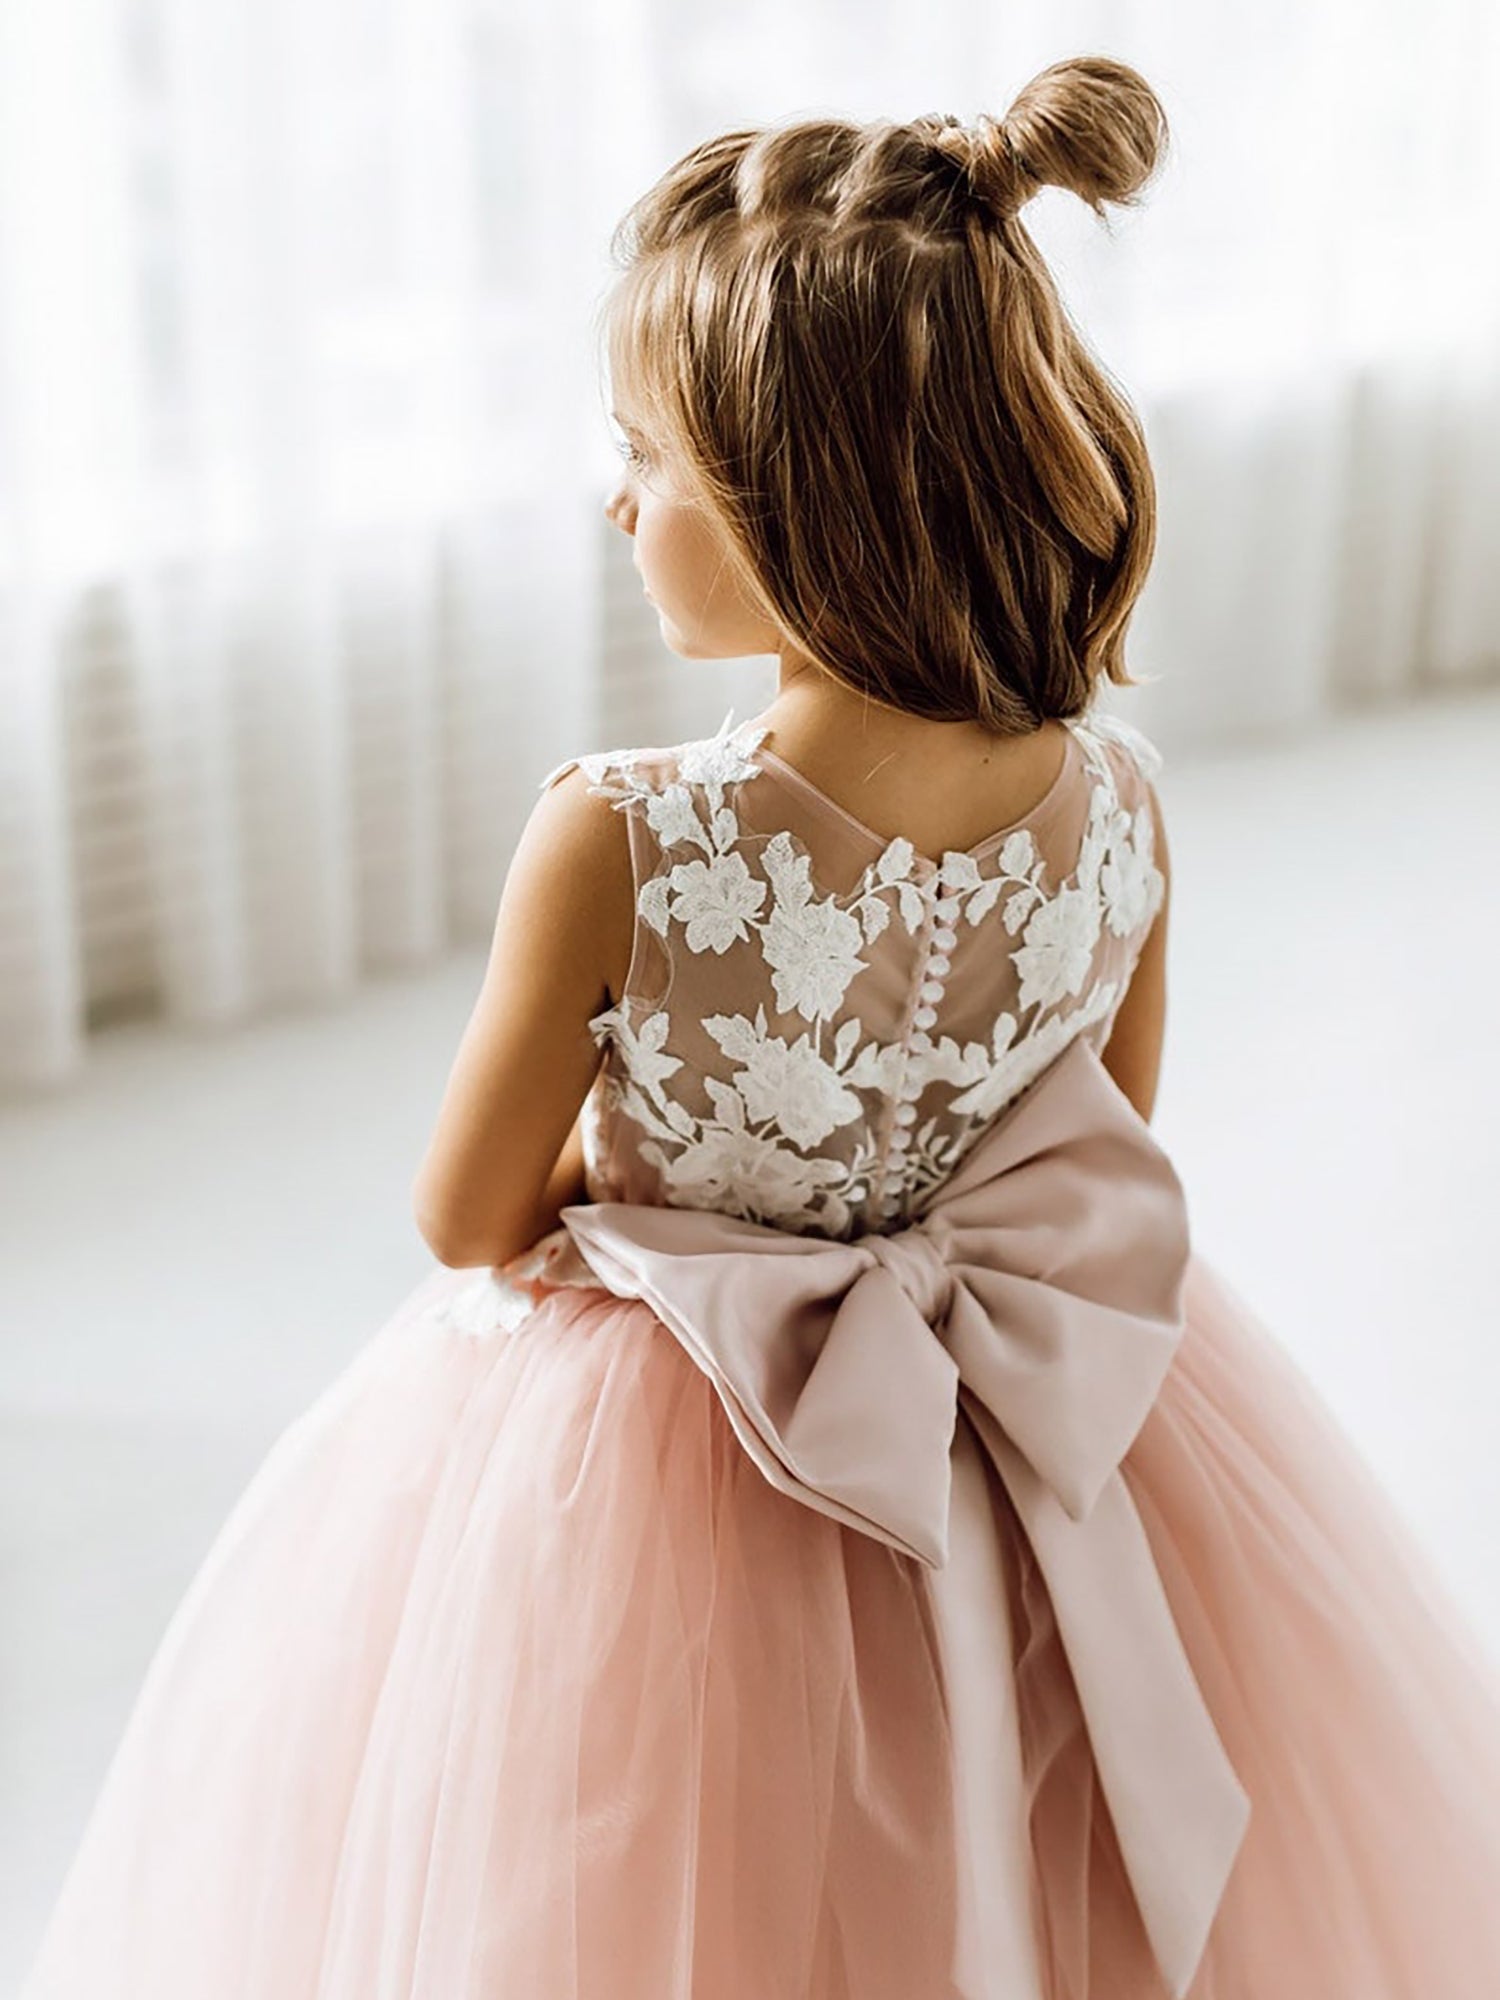 Cute Dusty Rose Puffy Lace Appliqued Sleeveless Flower Girl Dresses